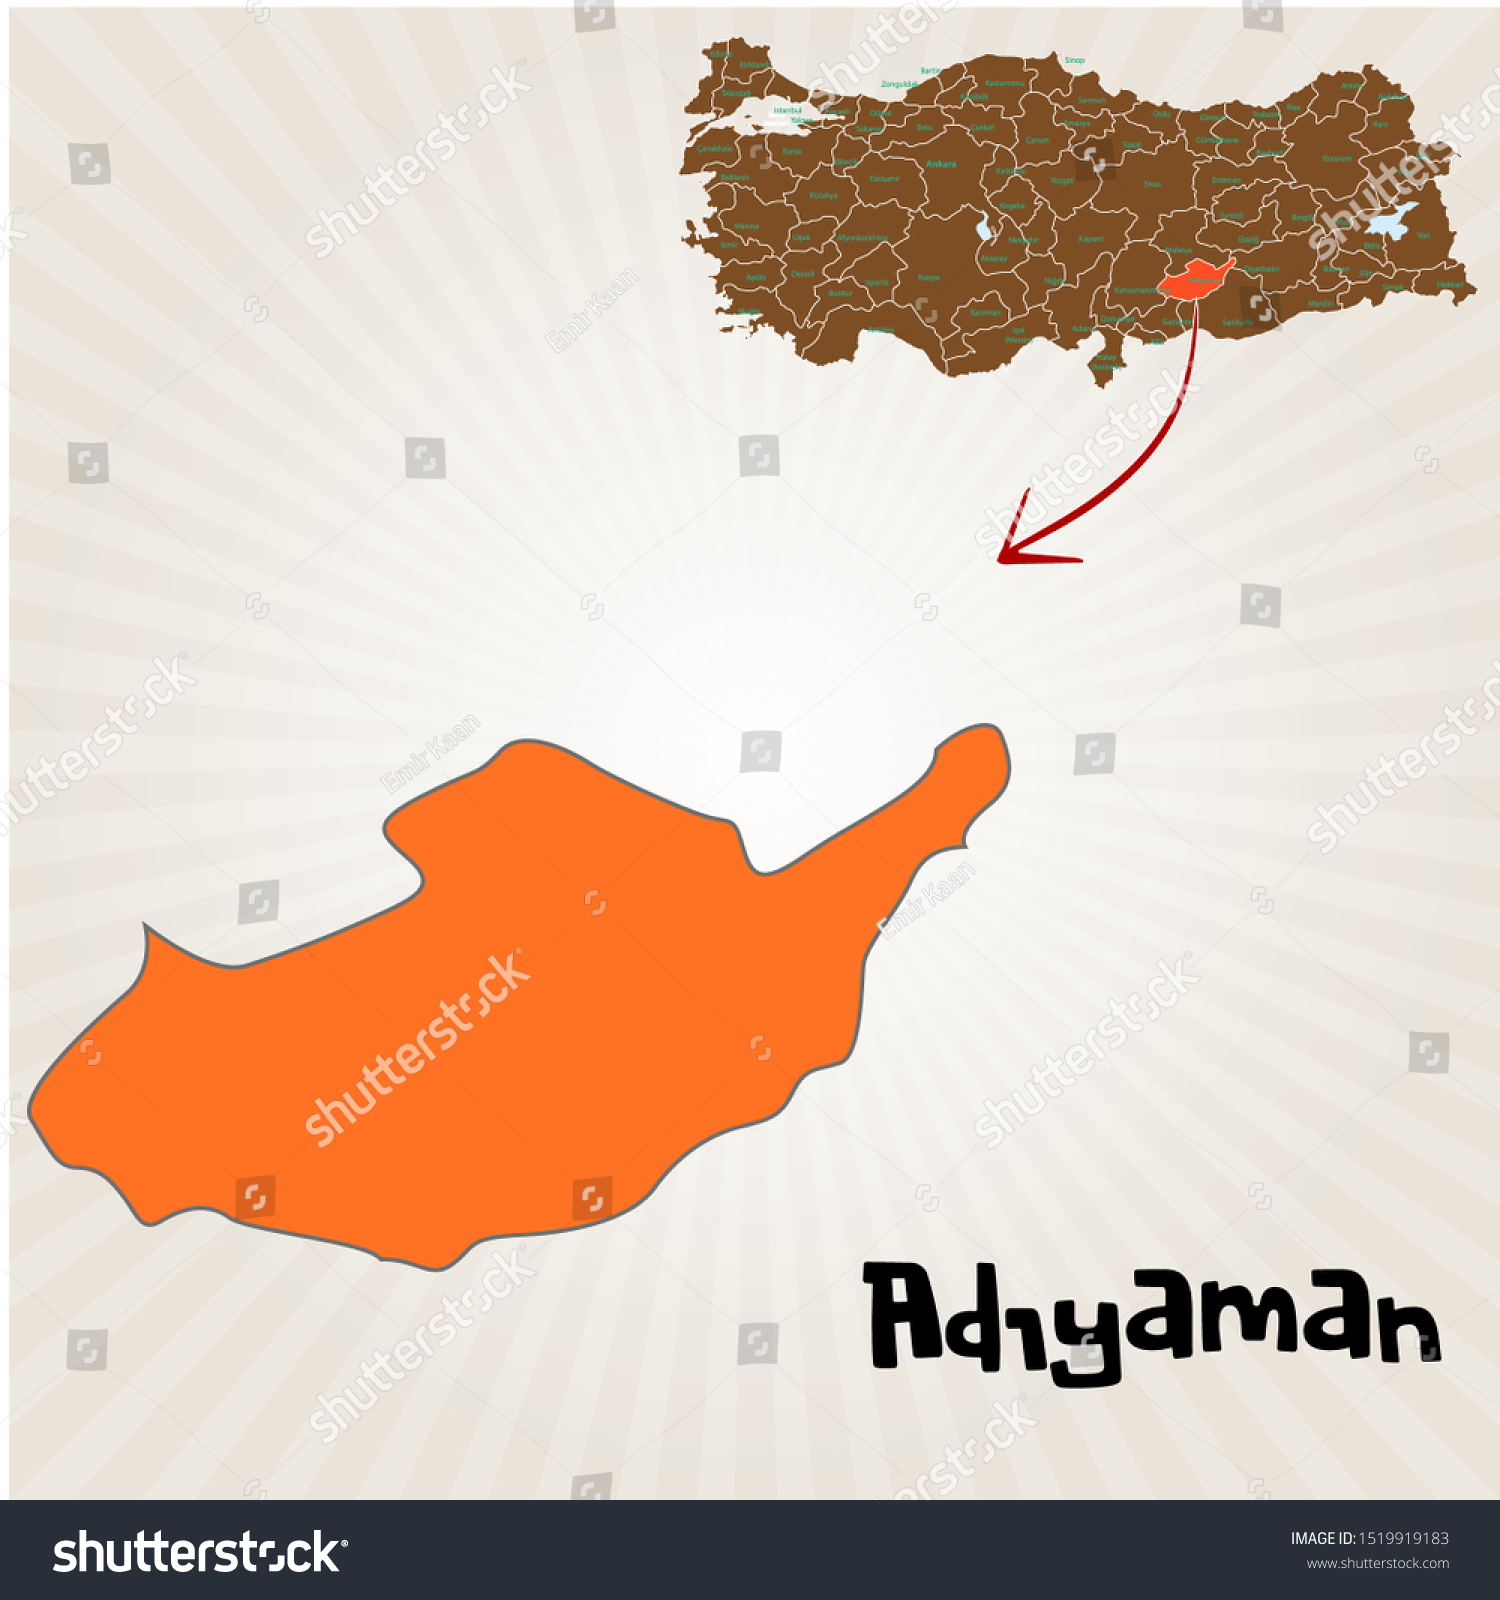 Cities and locations on the map of Turkey Adiyaman #1519919183